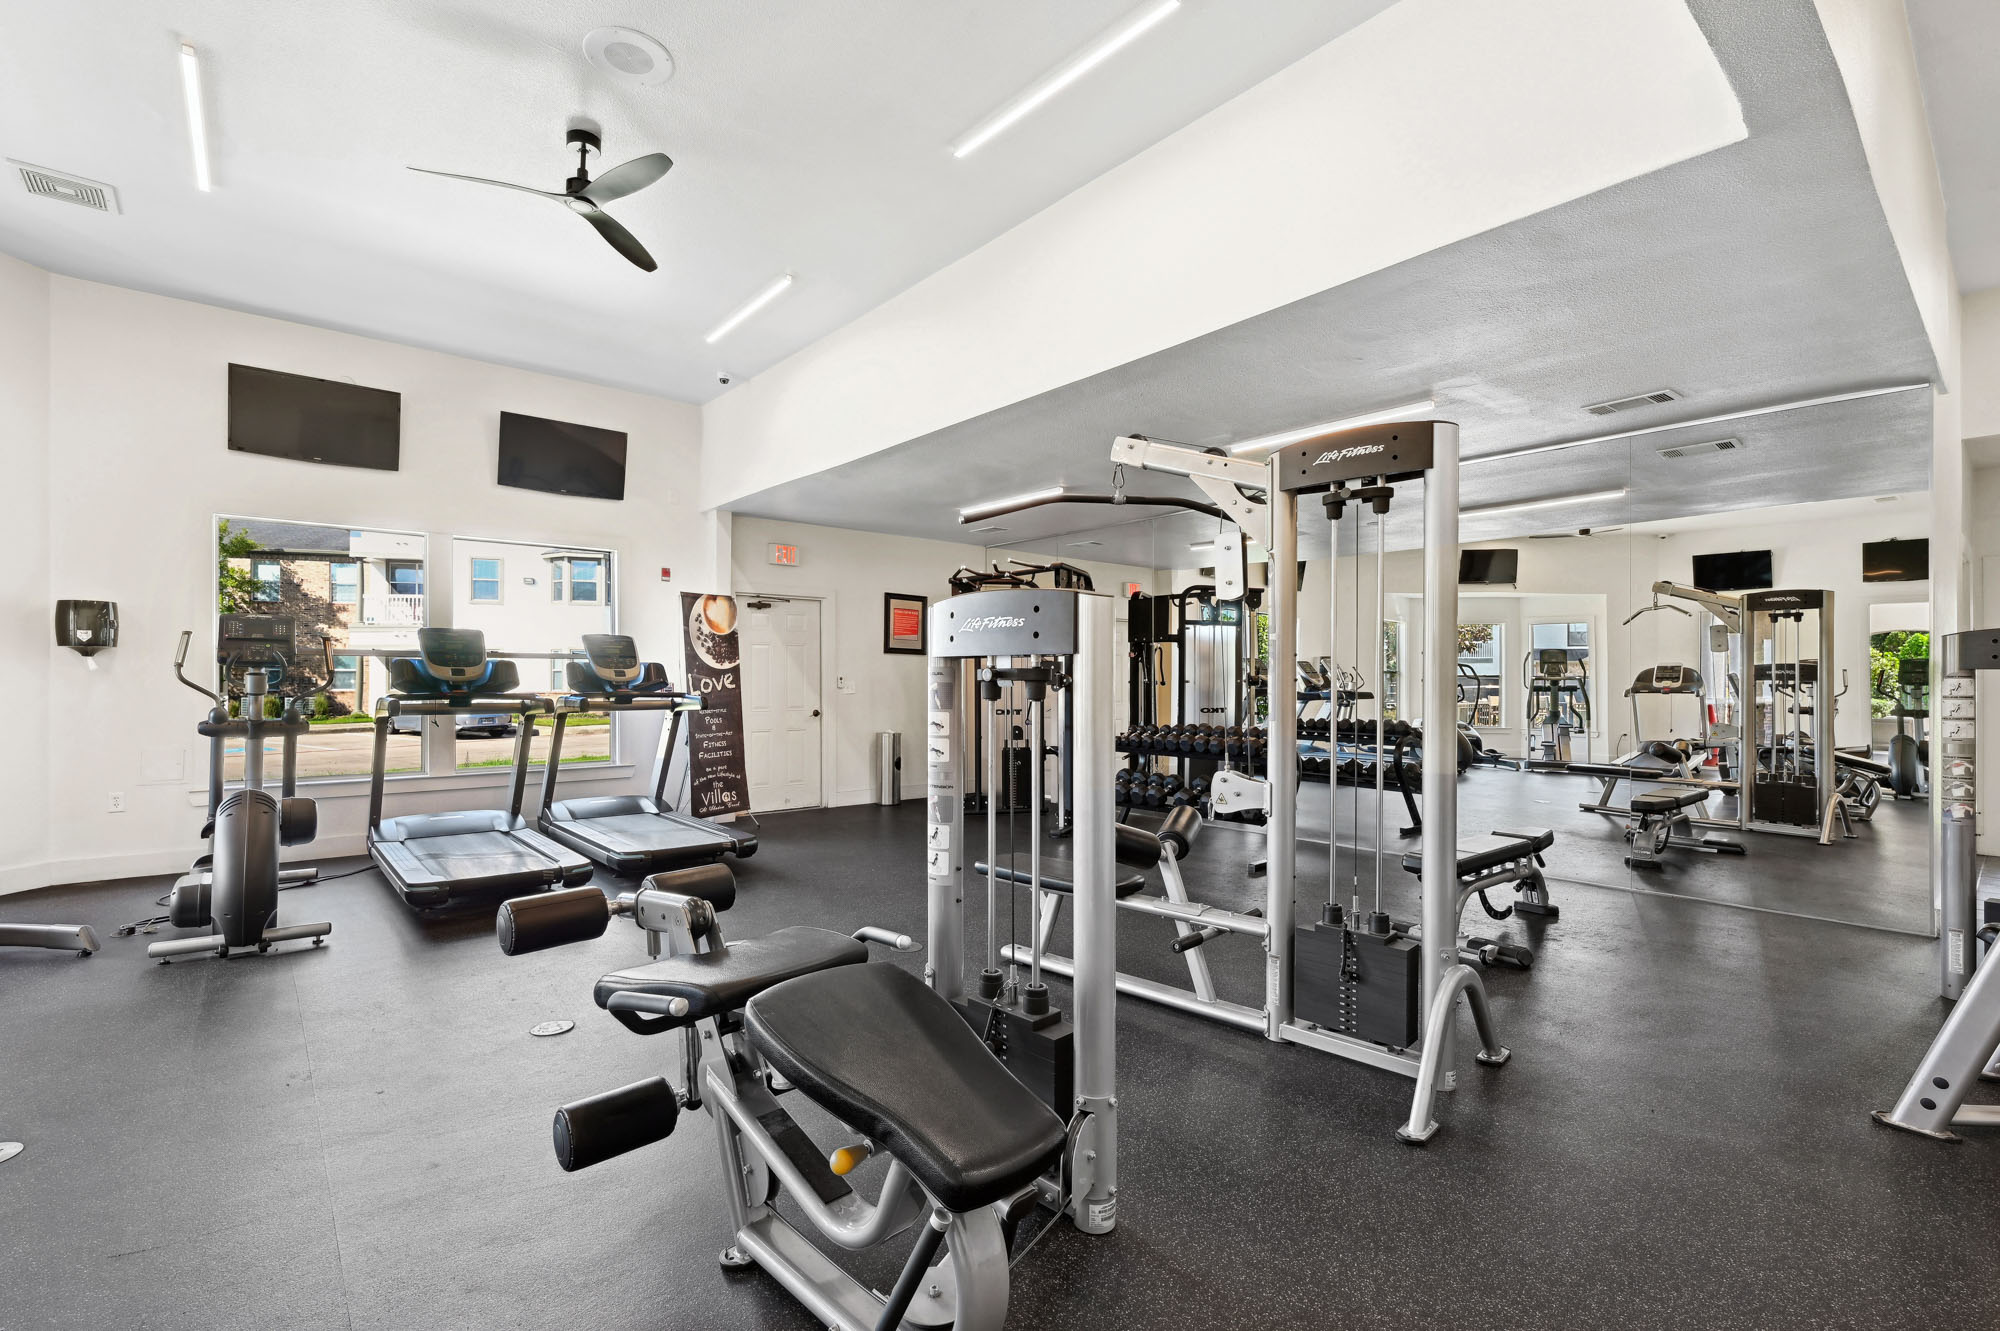 The fitness center at The Villas at Shadow Creek apartments in Houston, TX.